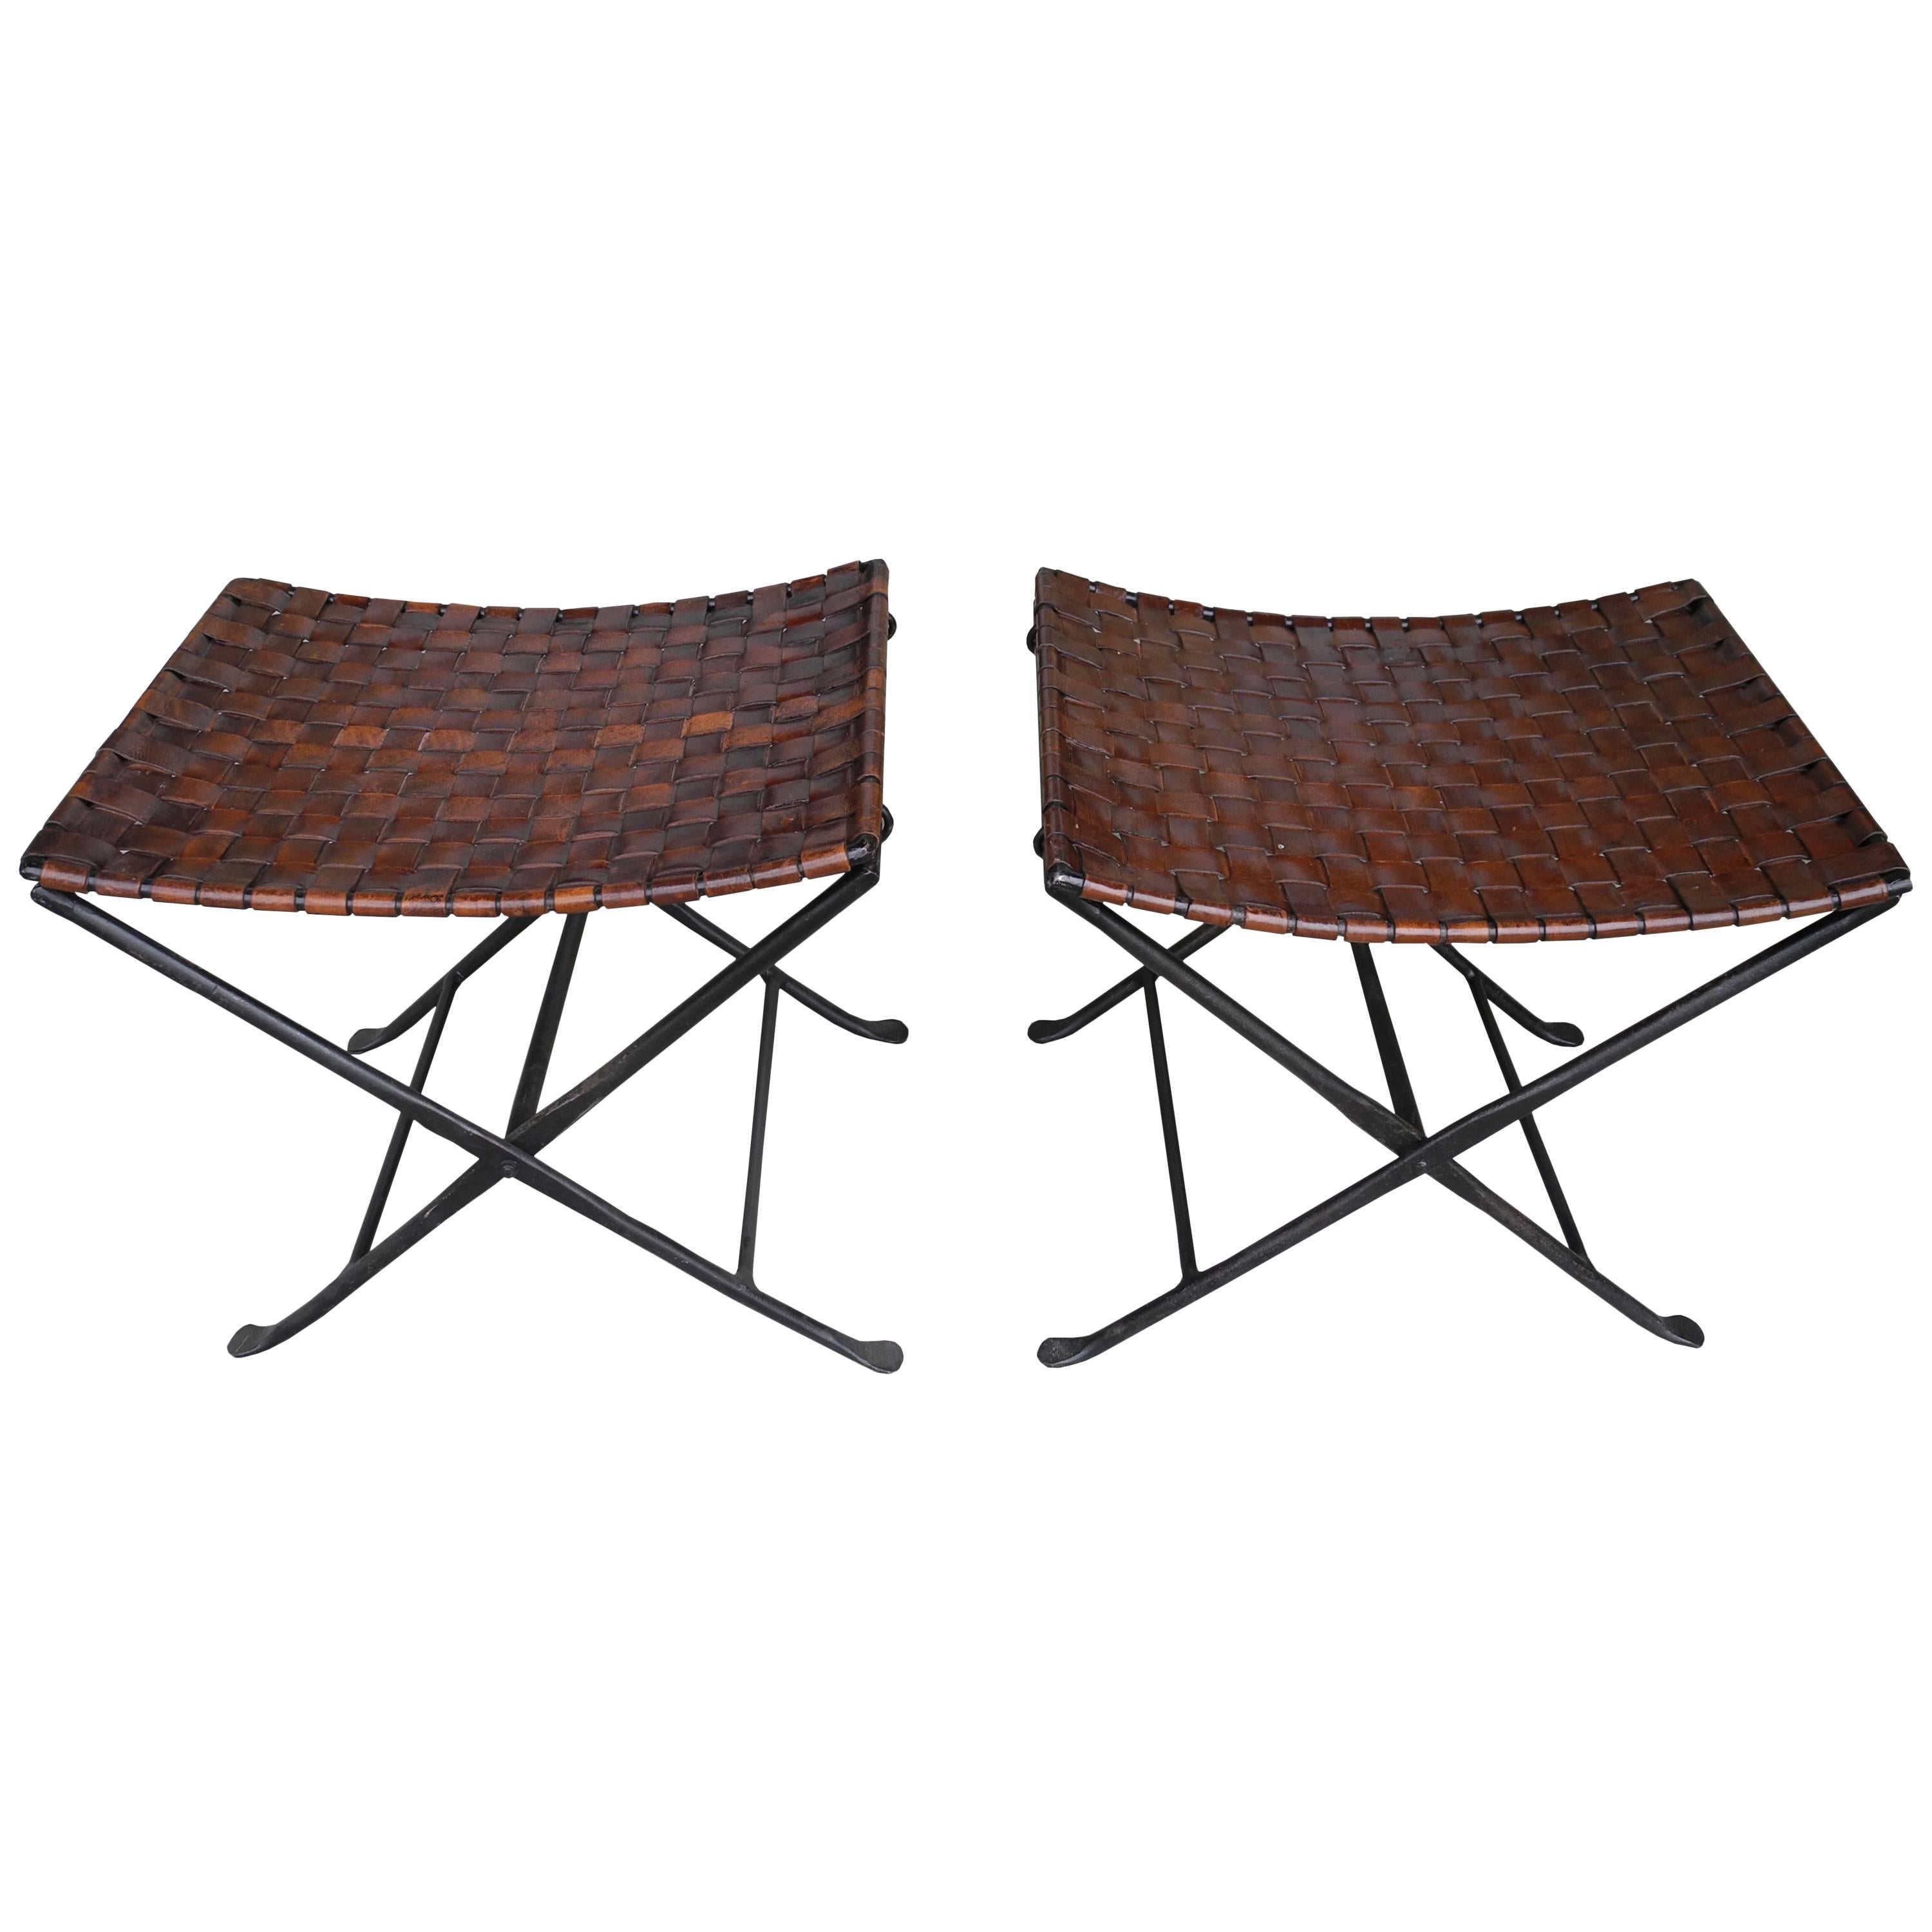 Vintage Modern Hand-Forged Metal and Leather Strap Folding Stools or Benches For Sale